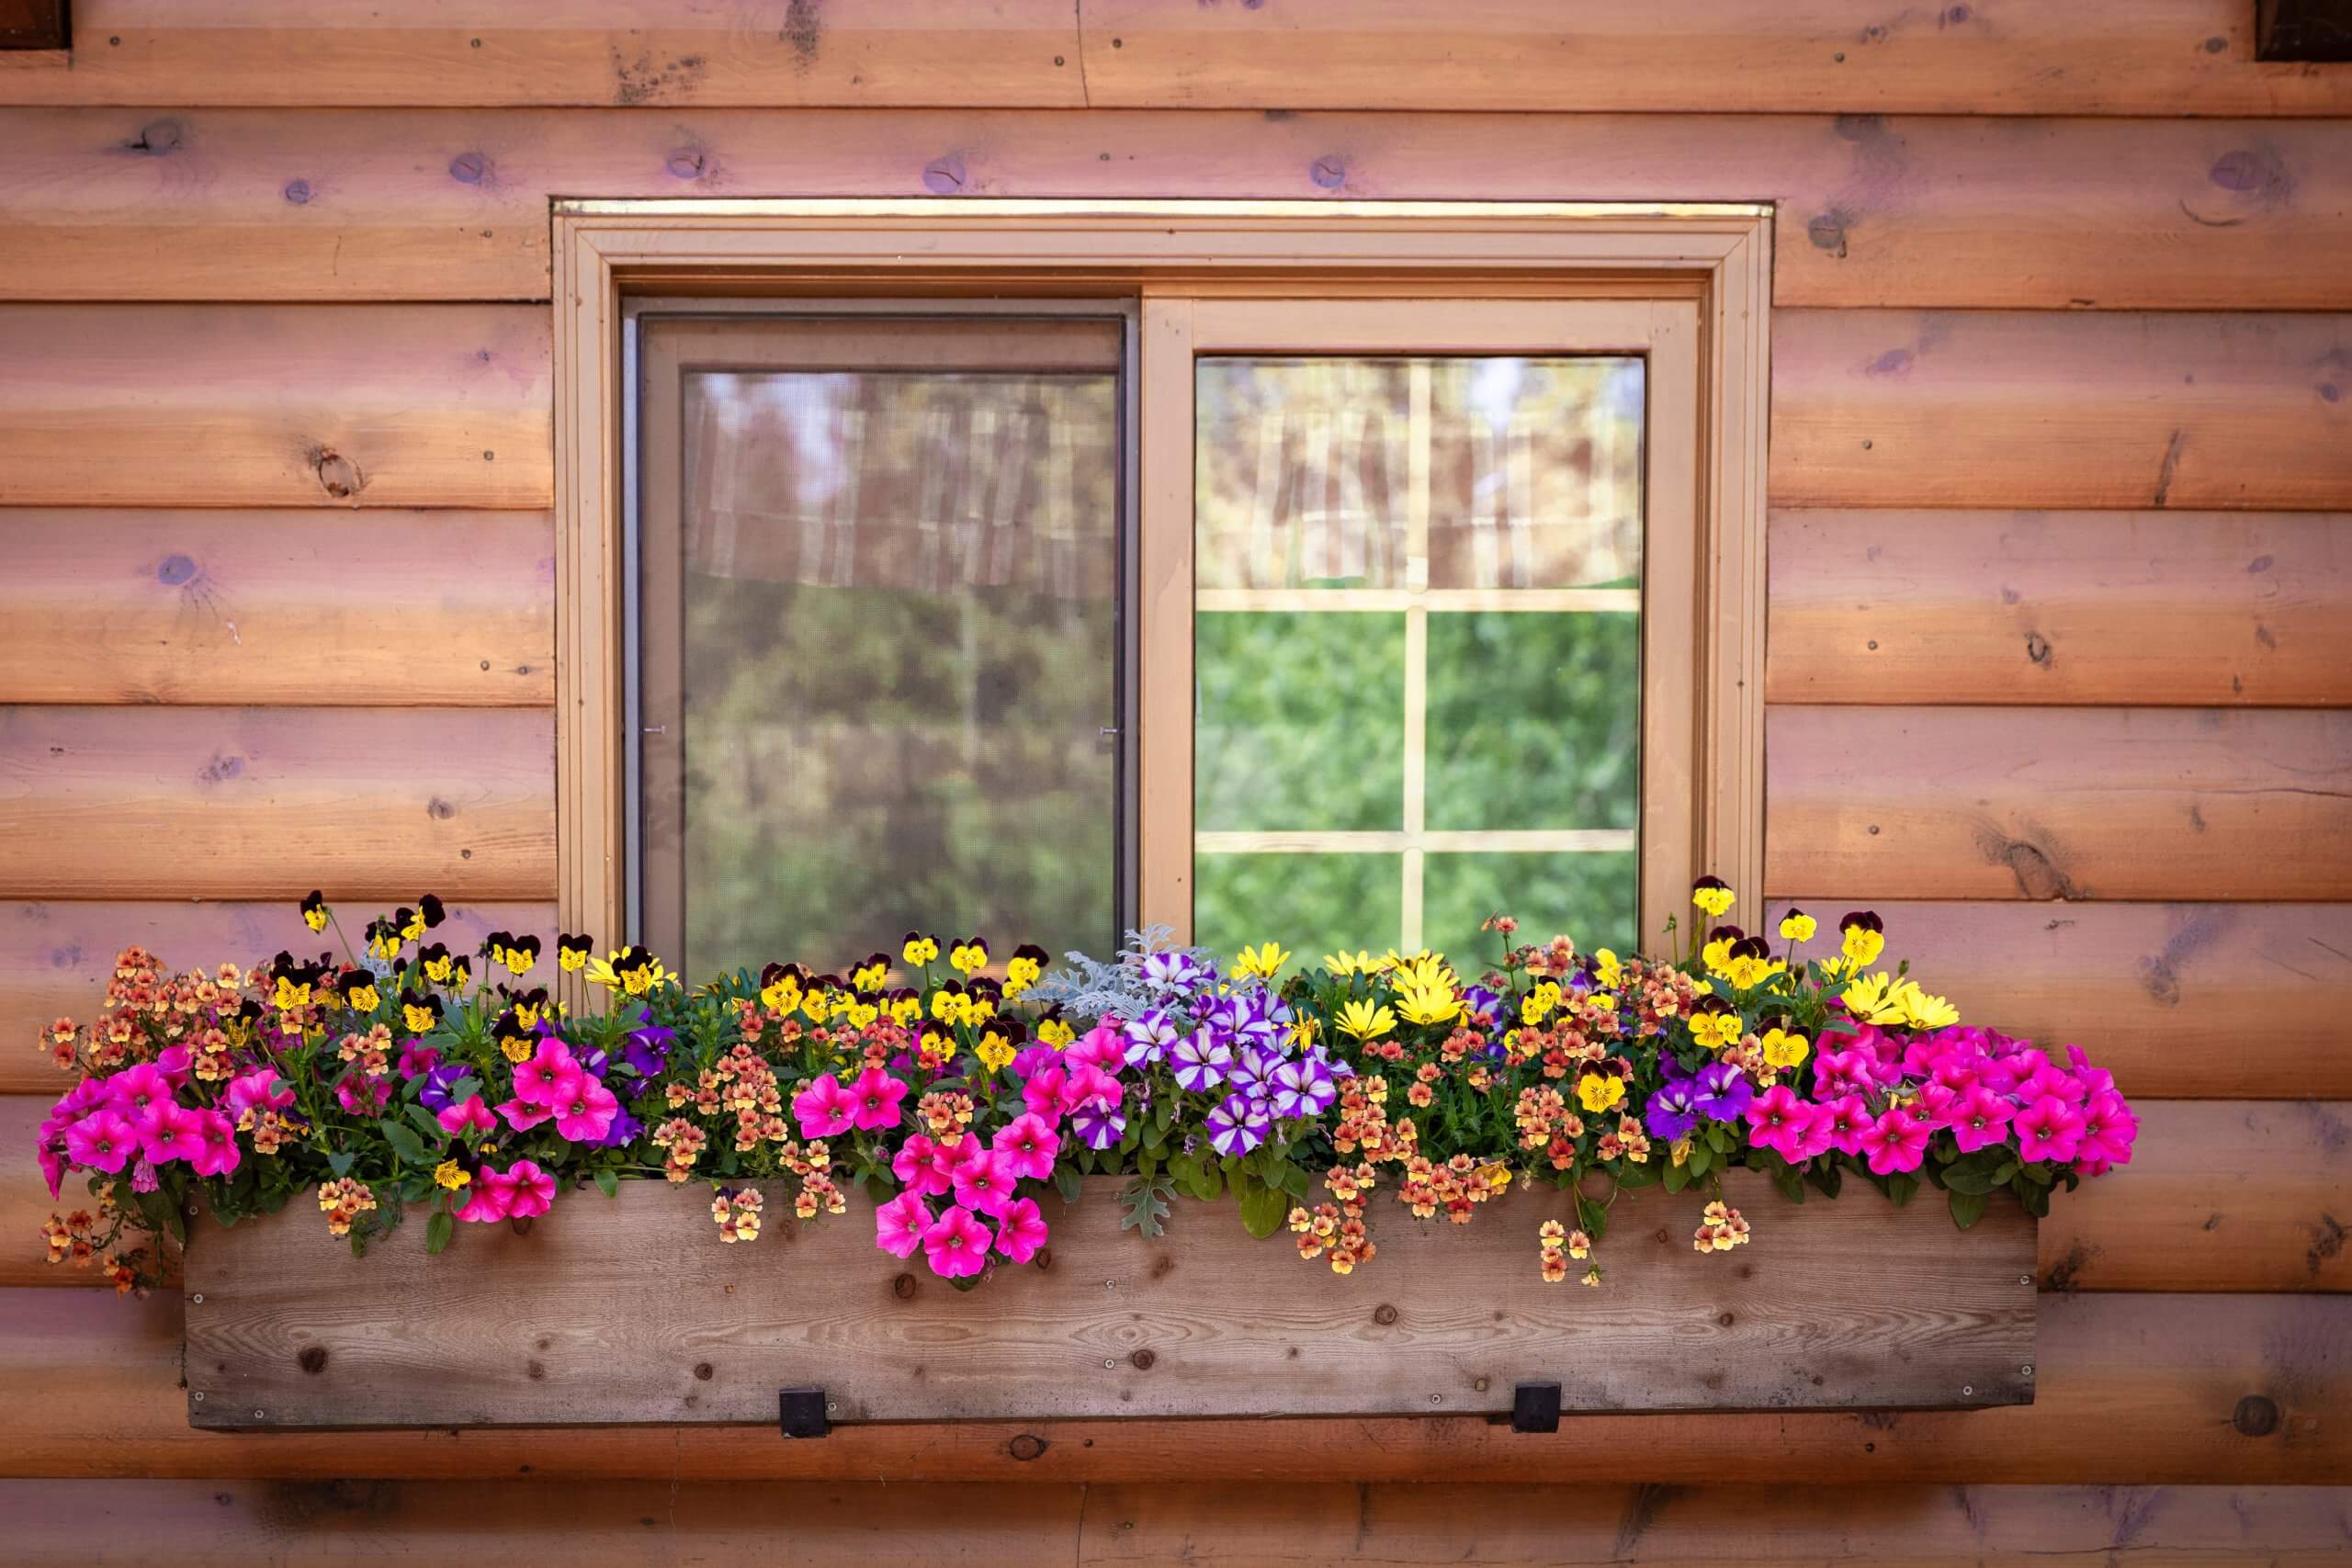 horizontal close up image of a log cabin with a window and window box full of colorful vibrant flowers in the summer time.